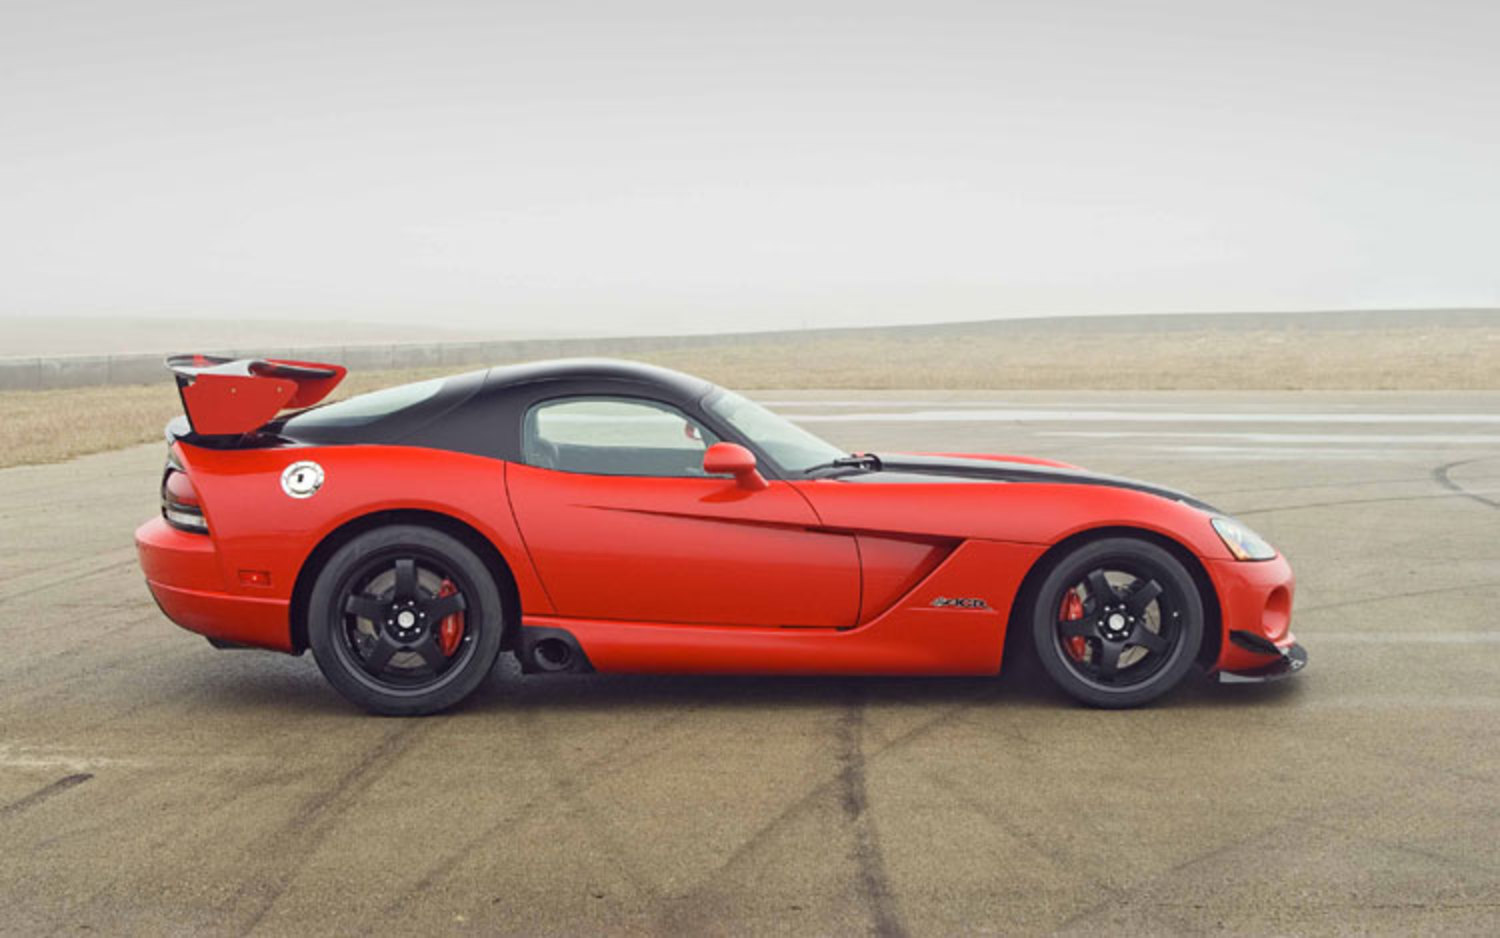 Wimps ( Z06s) Step Aside: Driving the 2009 Dodge Viper ACR